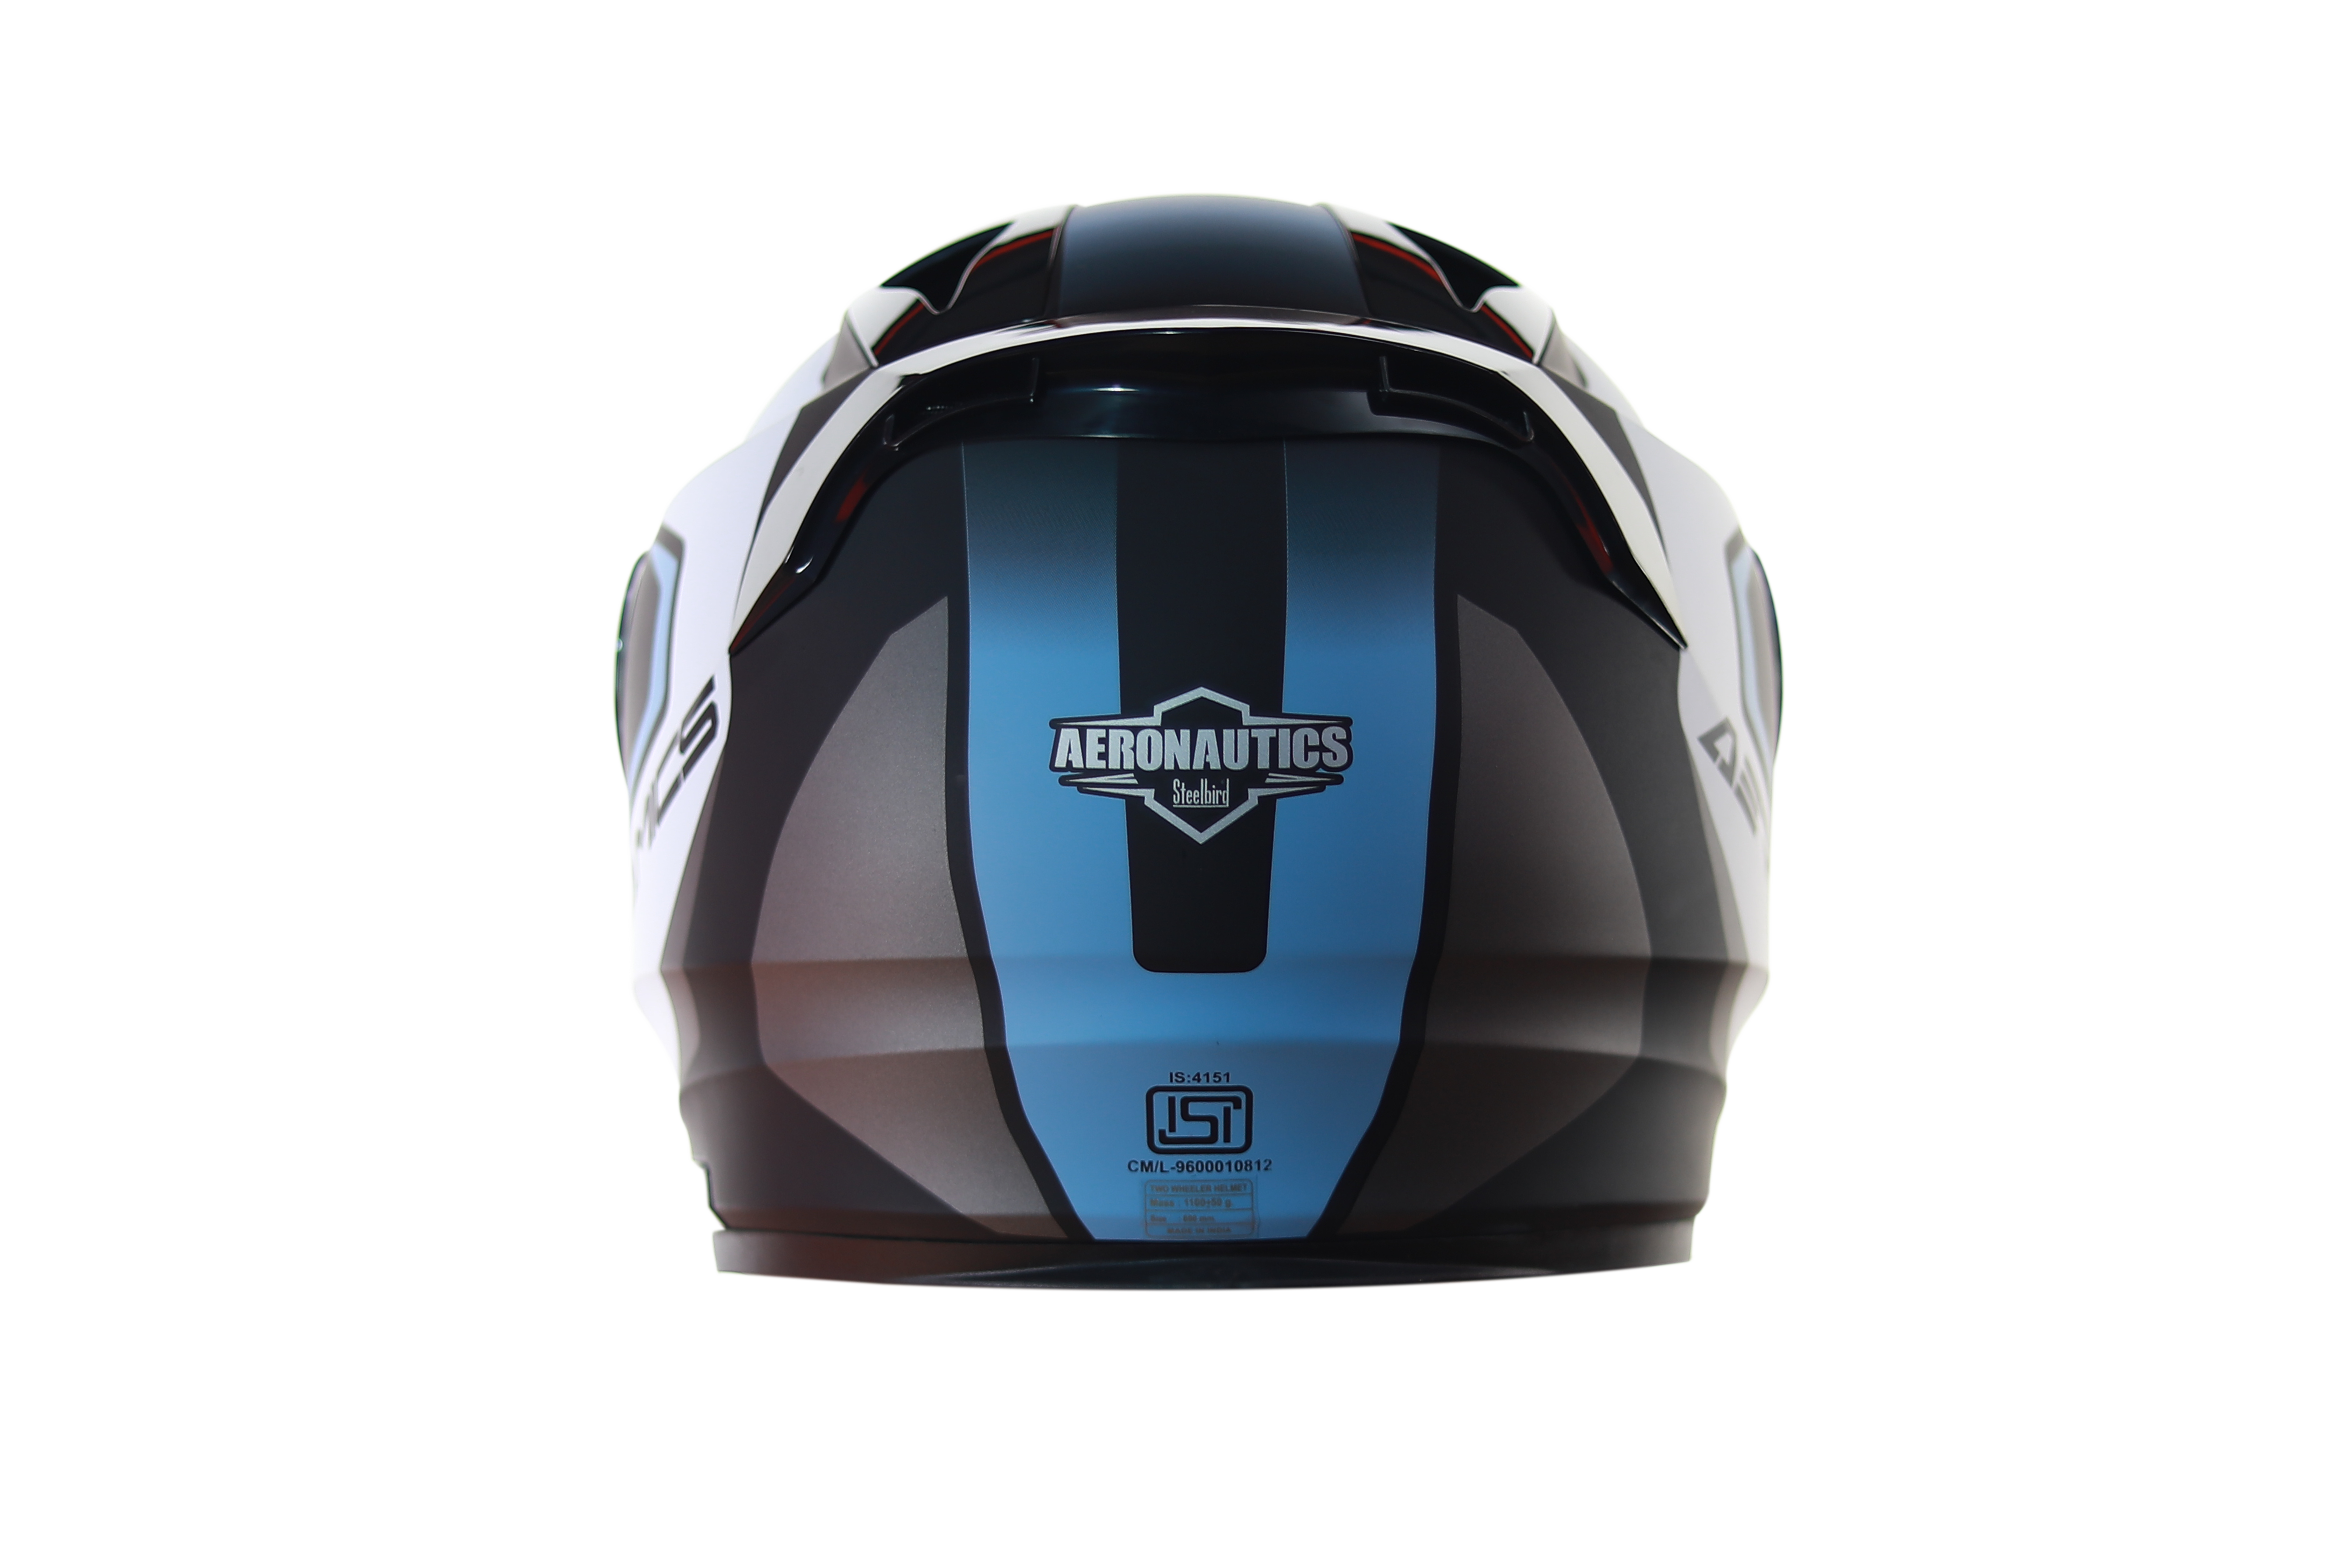 SA-1 Aerodynamics Mat Black With Light Blue(Fitted With Clear Visor Extra Blue Chrome Visor Free)